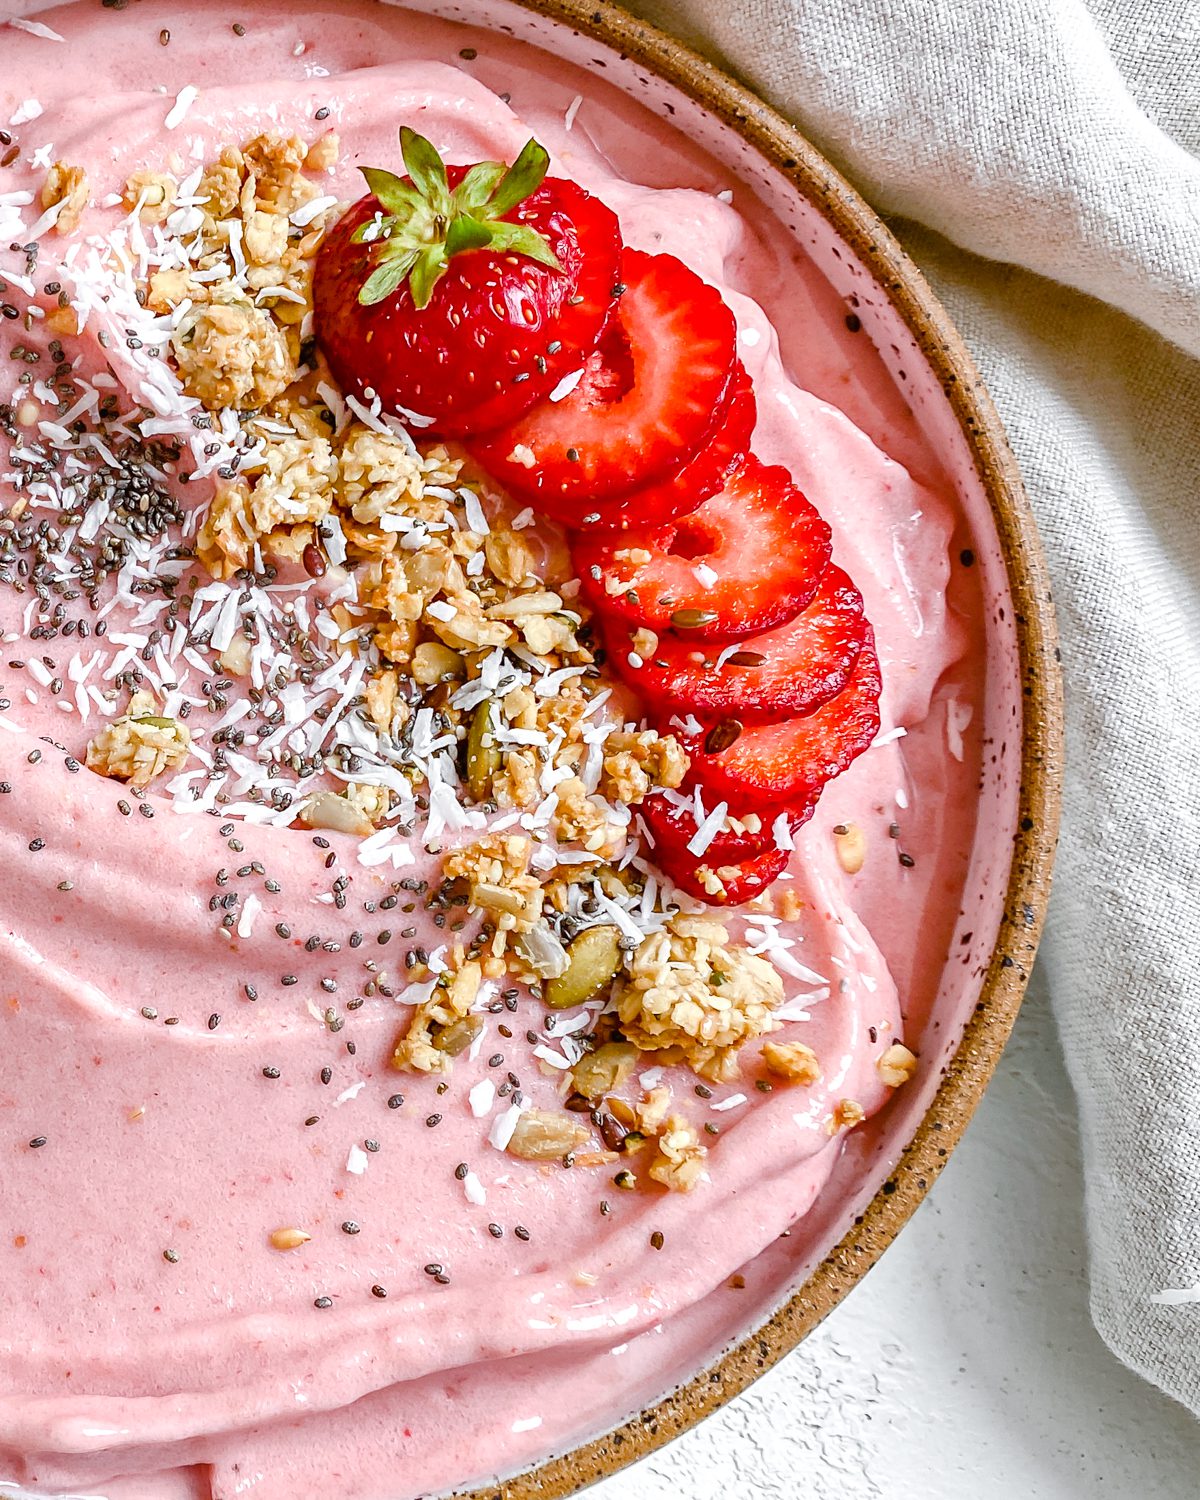 completed Strawberry Smoothie Bowl against a white surface